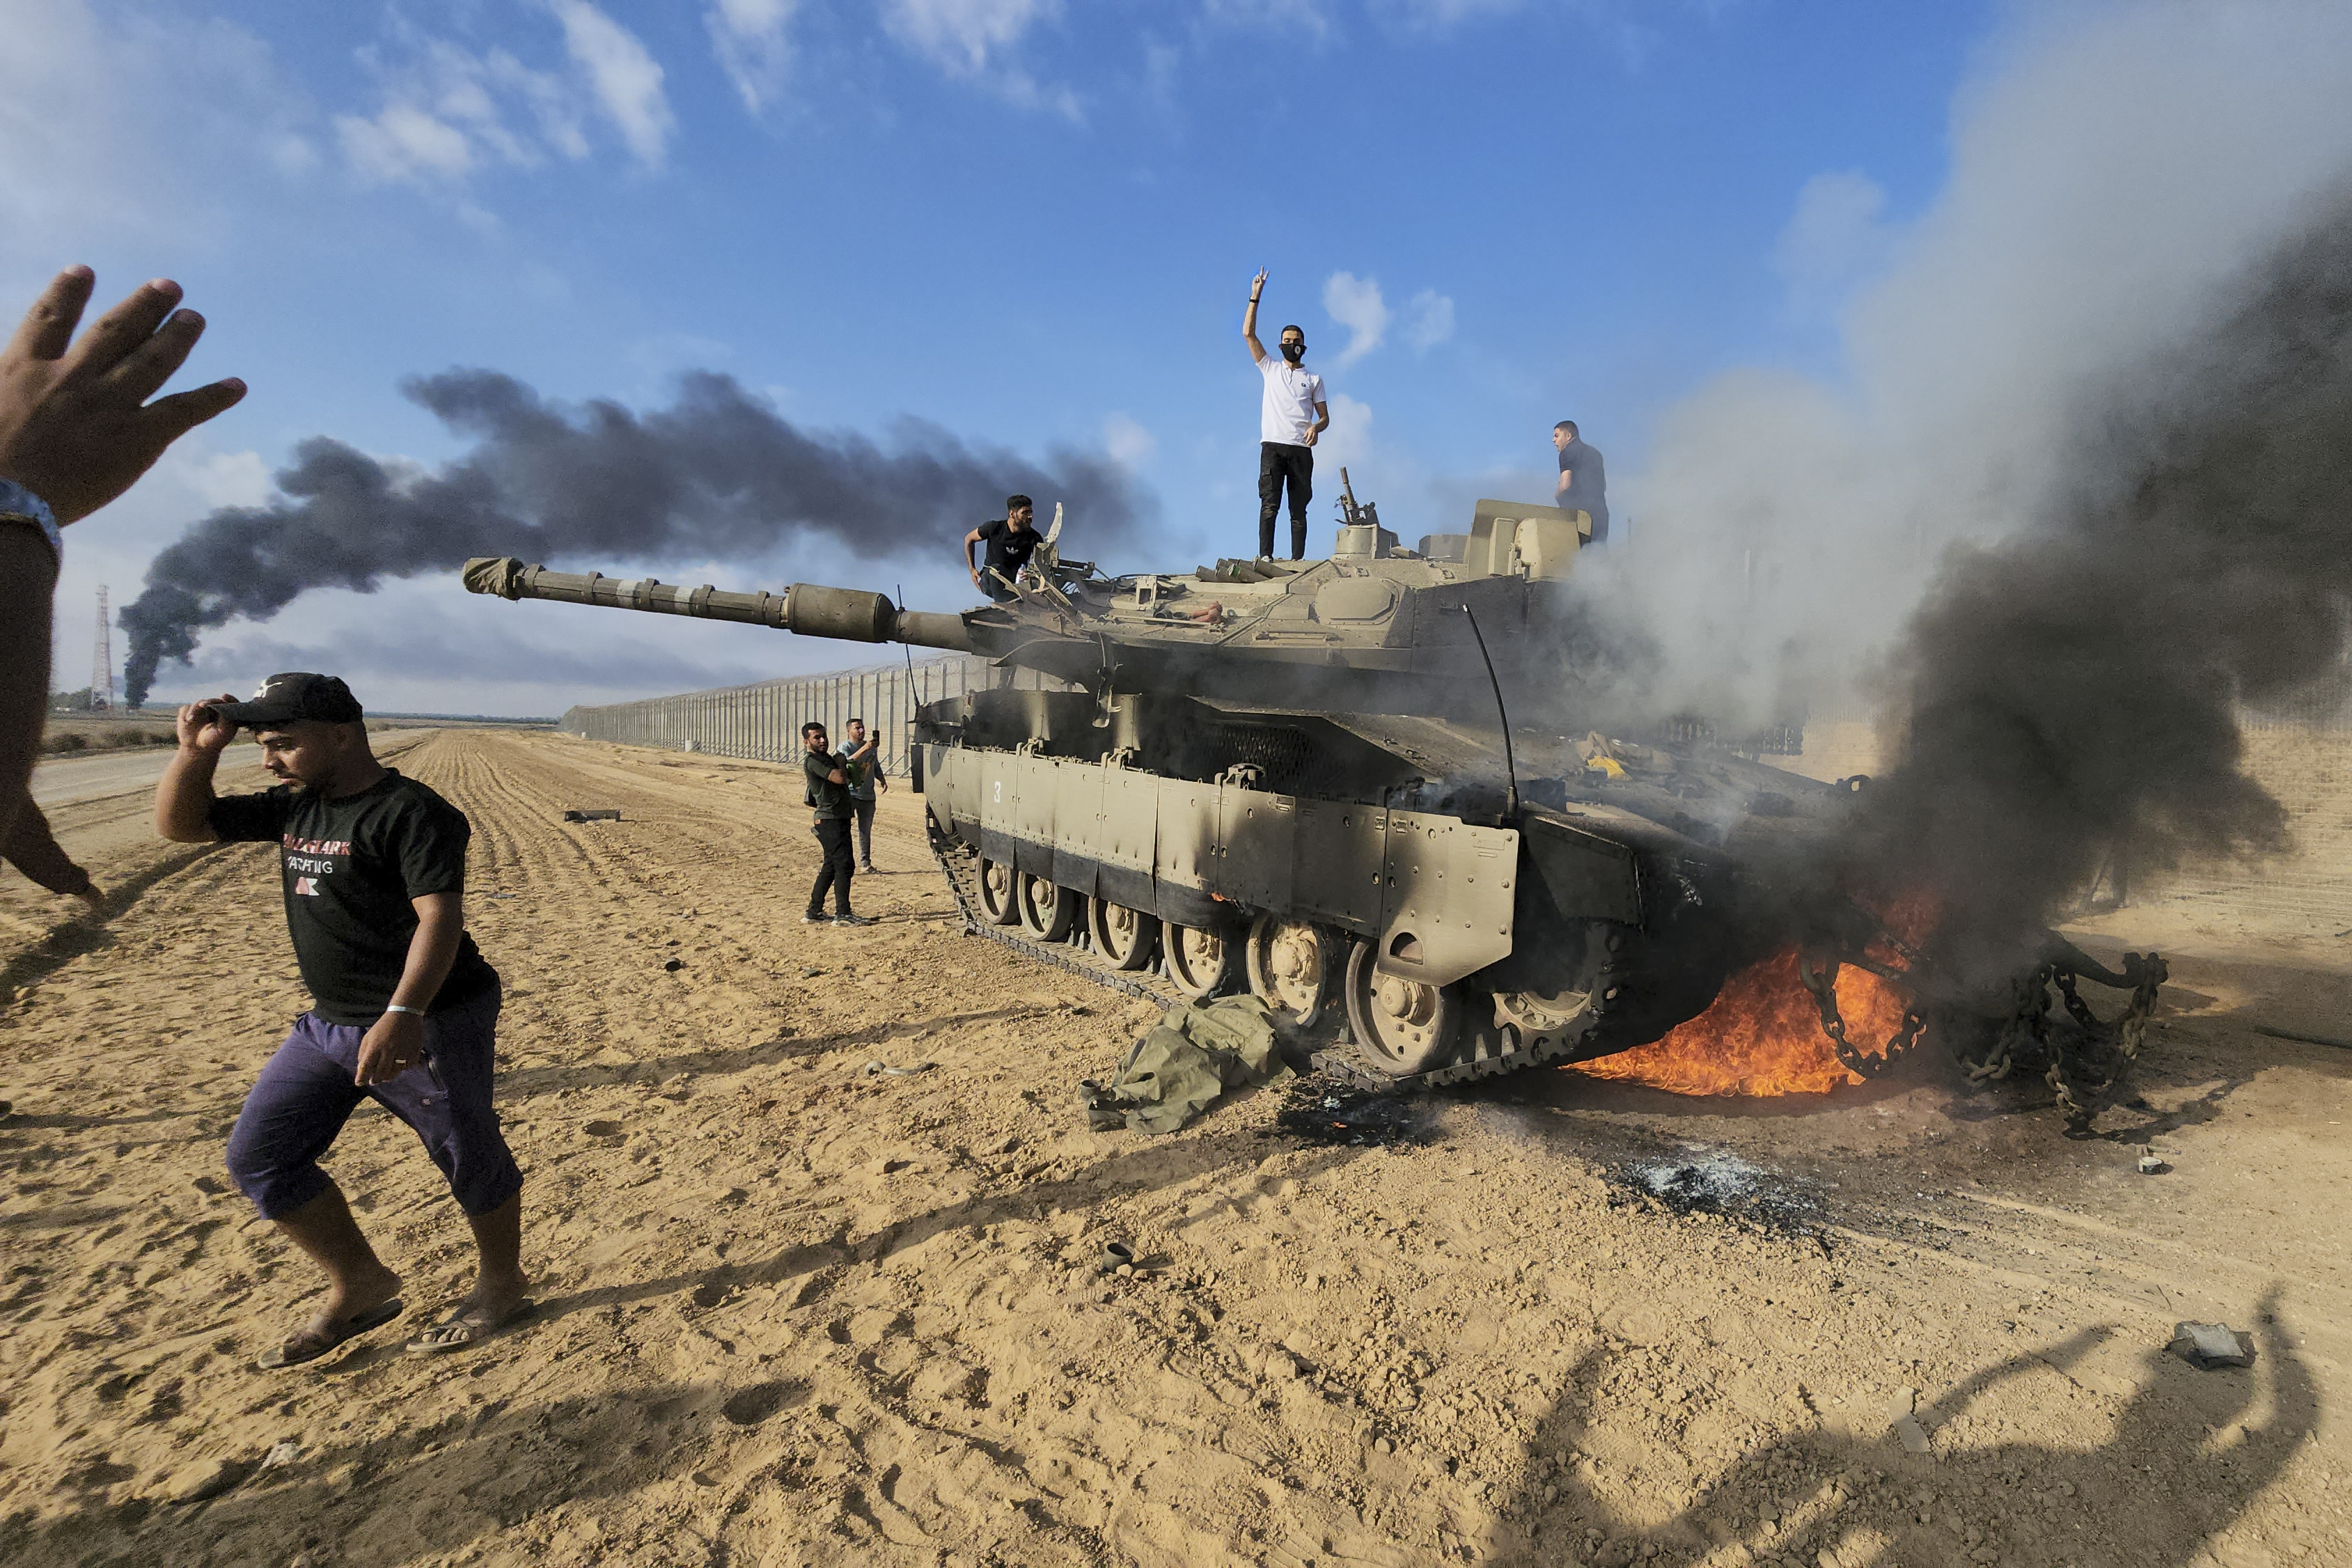 Hamas Israel Conflict pictures